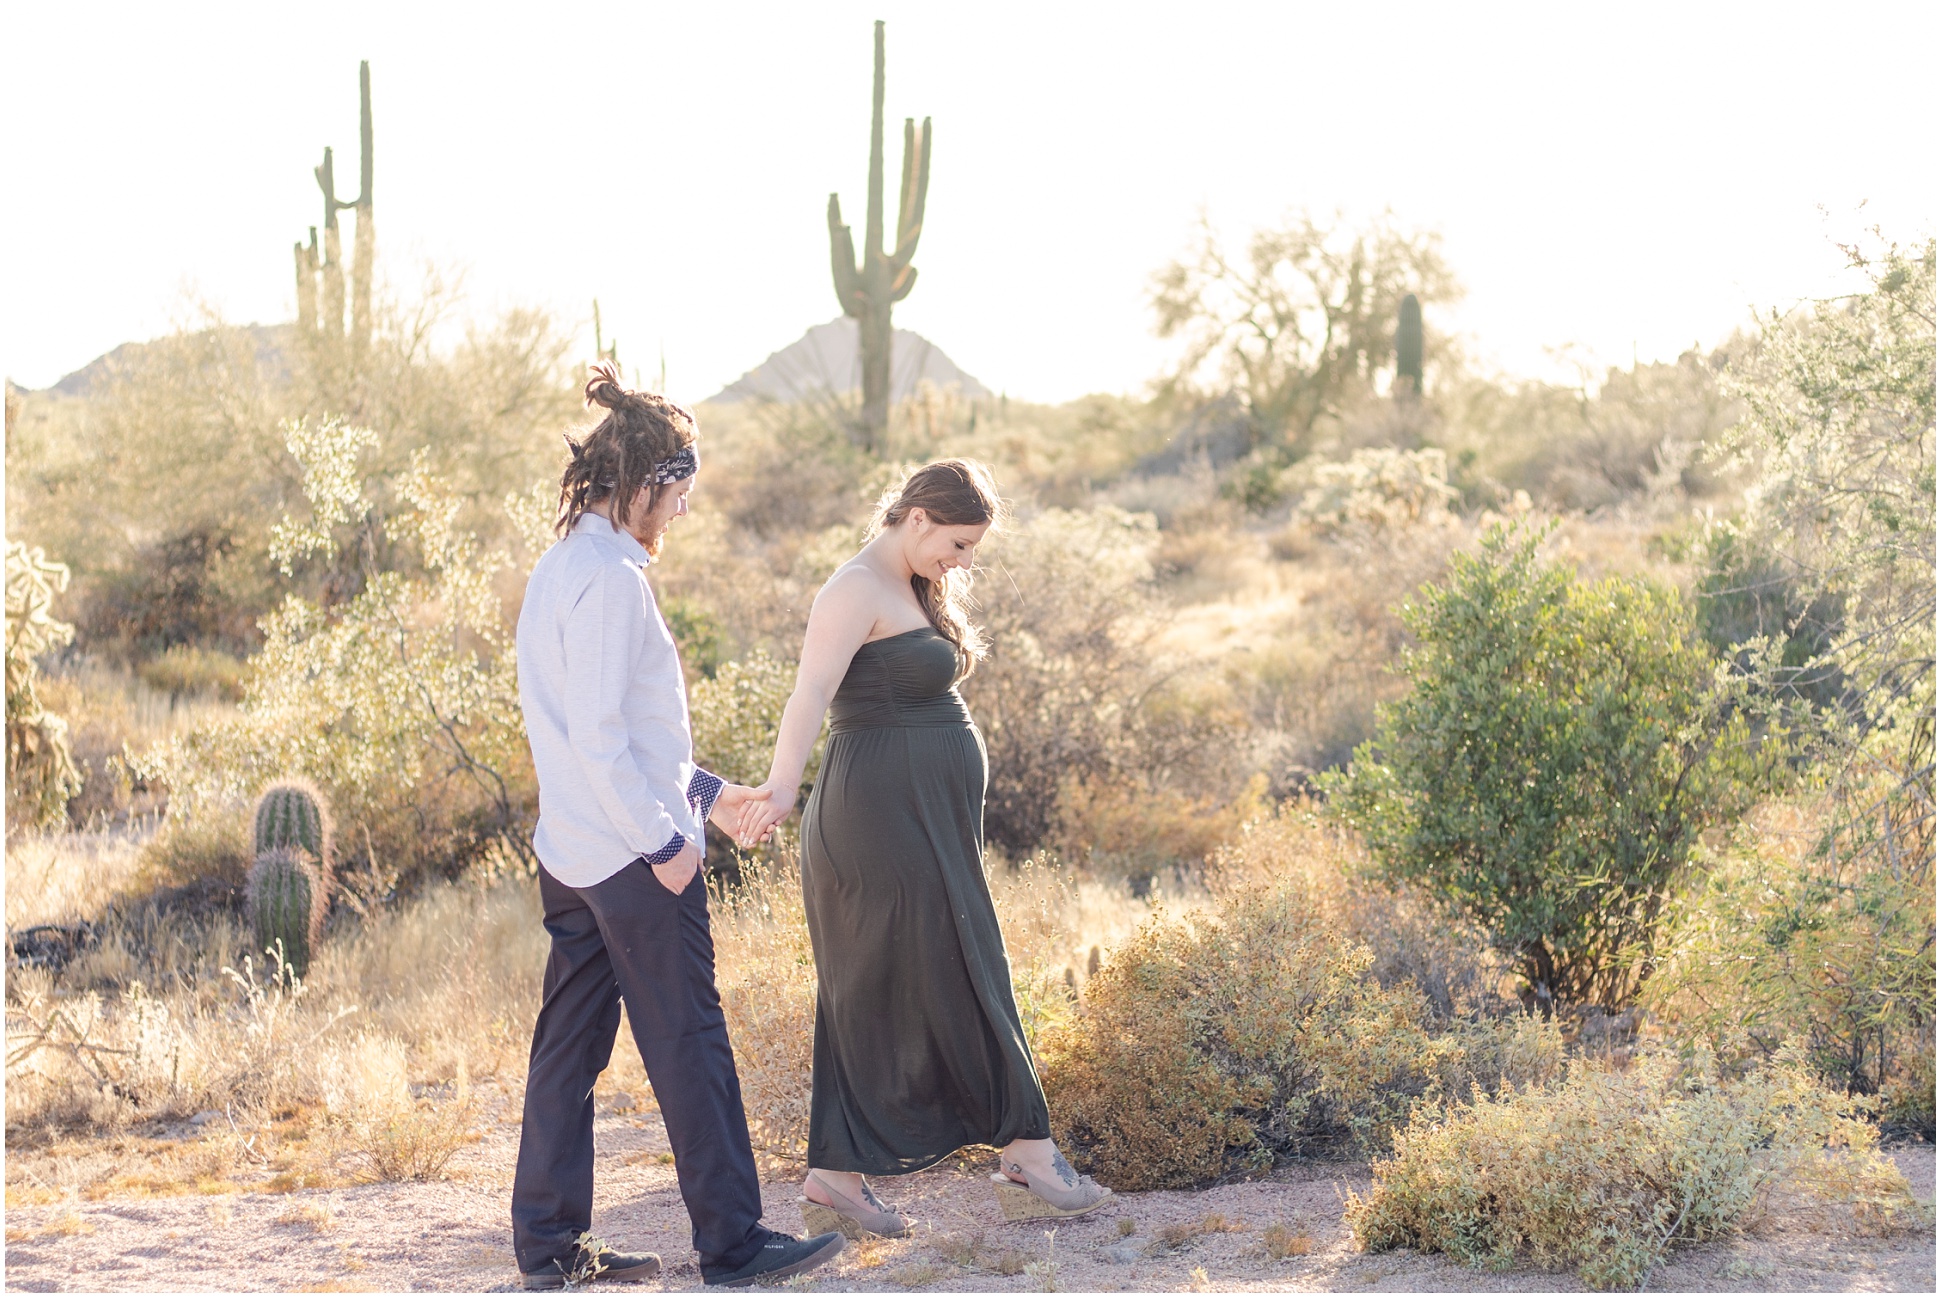 Pregnant Woman guiding her husband through the desert in green maternity dress